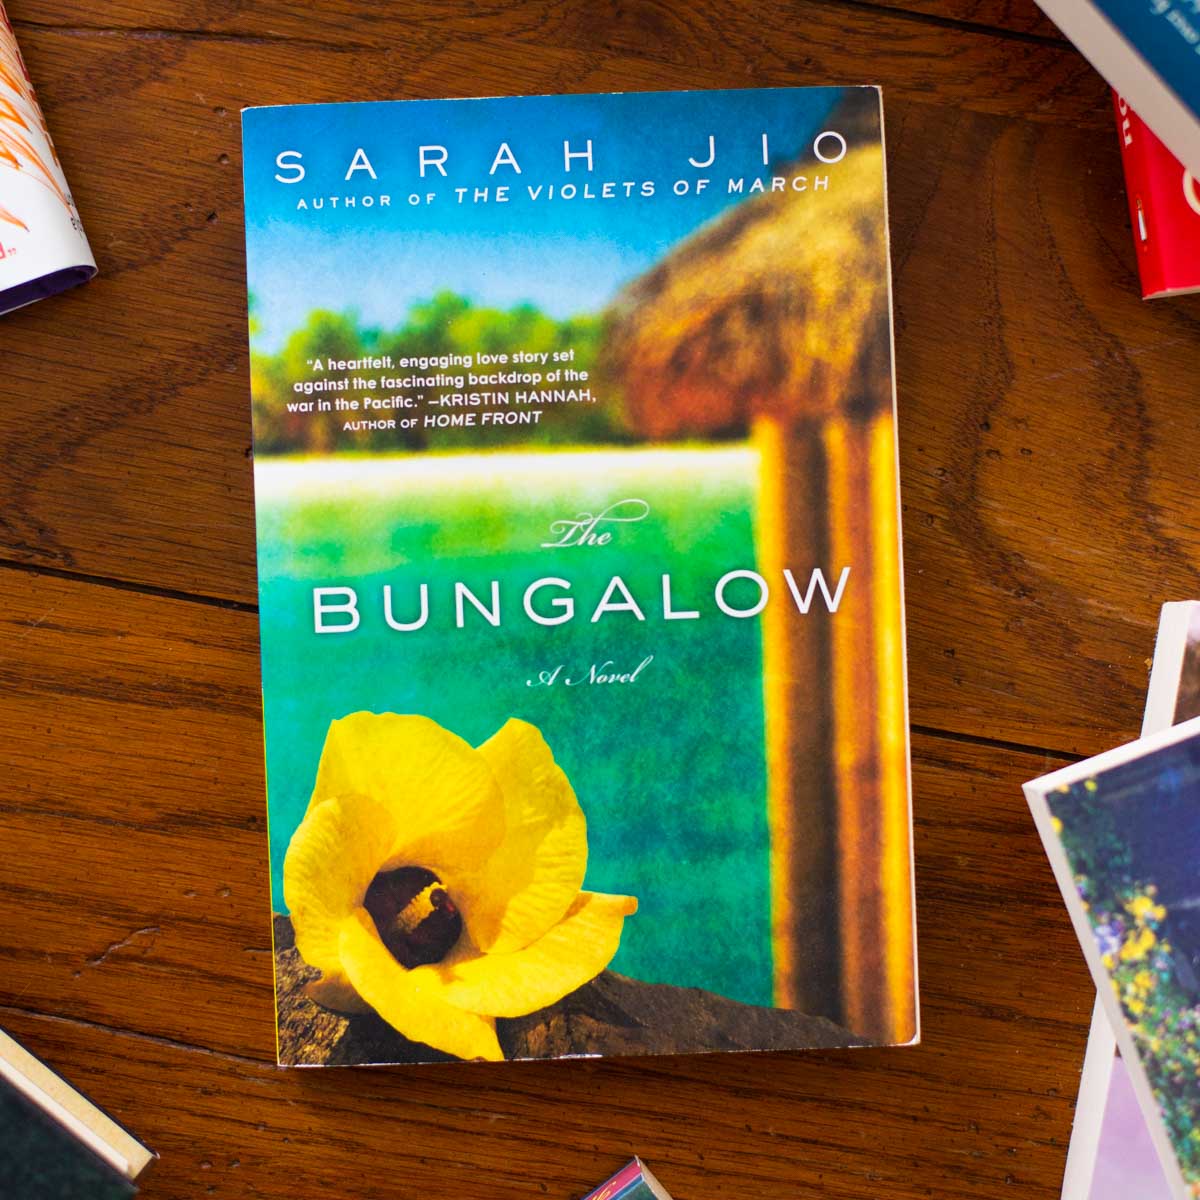 A copy of the book The Bungalow sits on a table.